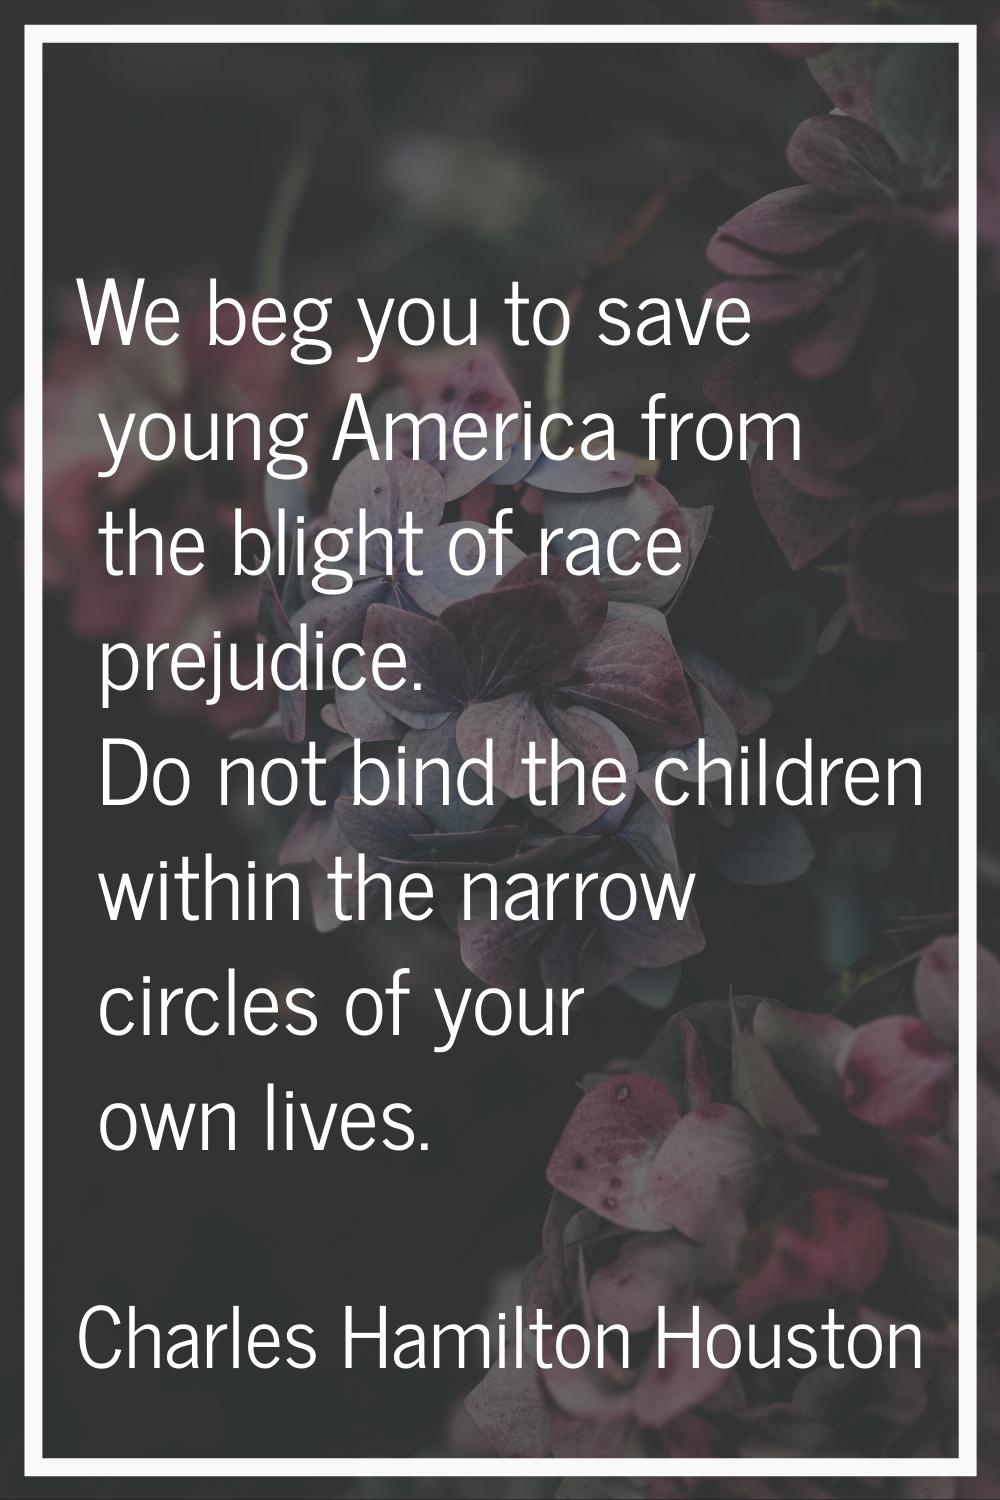 We beg you to save young America from the blight of race prejudice. Do not bind the children within